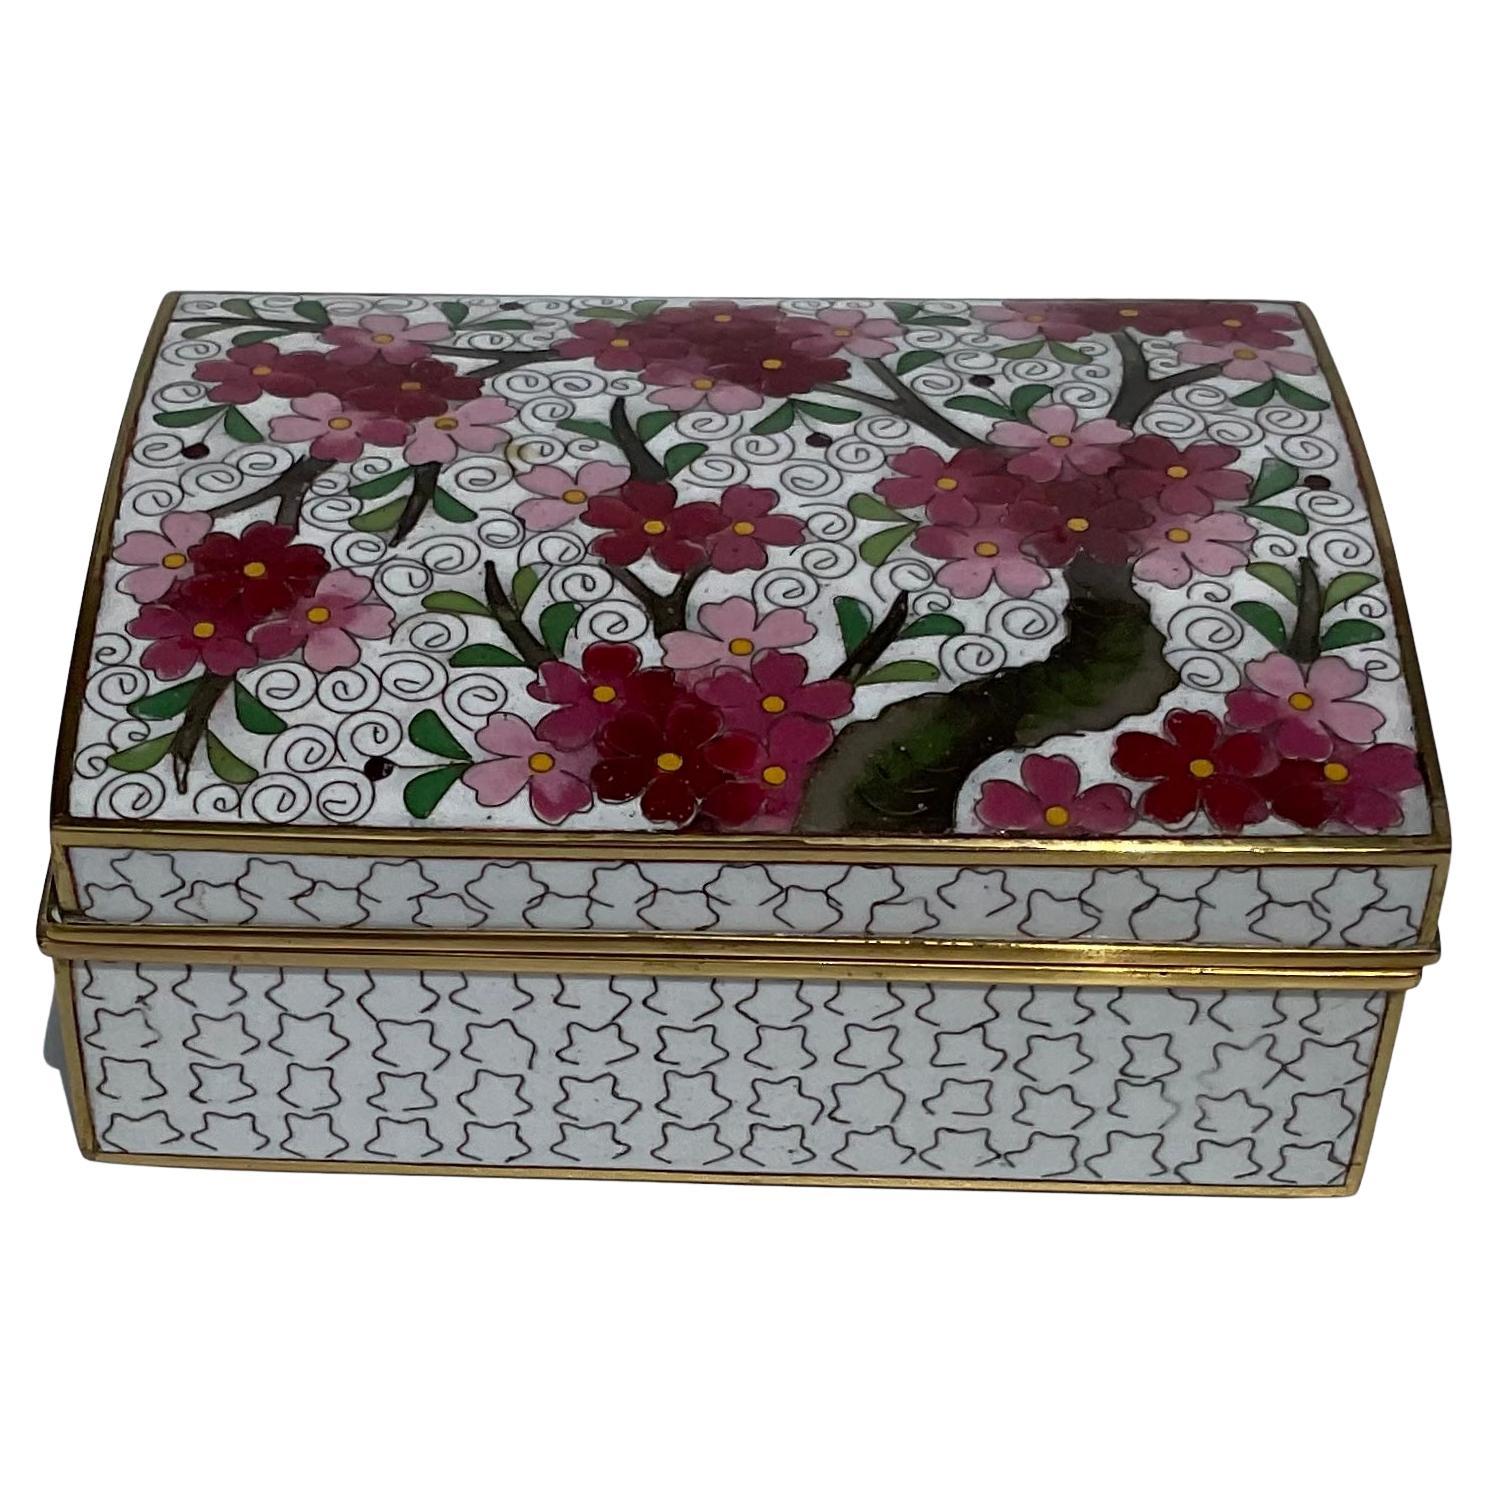 Ando Signed Japanese Flowering Tree Box Cloisonne with Amazing Design For Sale